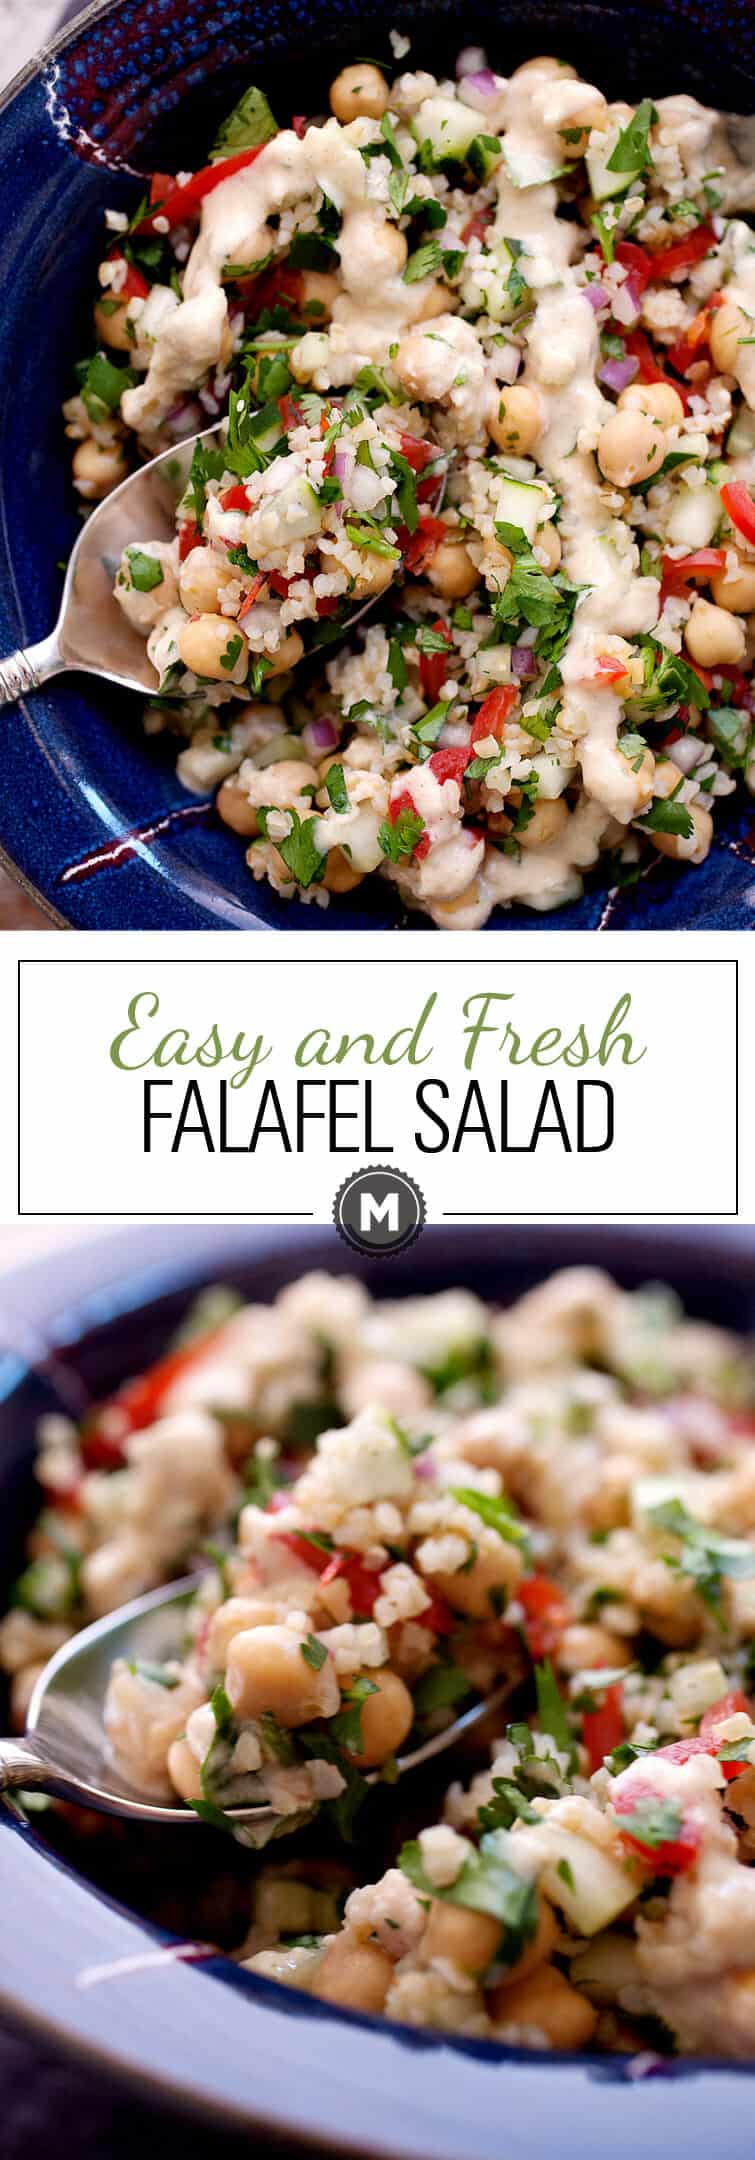 Easy and Fresh Falafel Salad: All the ingredients of a traditional falafel tossed in a quick and fresh salad! Chickpeas, bulgar, loads of herbs, and fresh, crunchy veggies plus a simple Tahini dressing. Great side dish or light lunch! | macheesmo.com